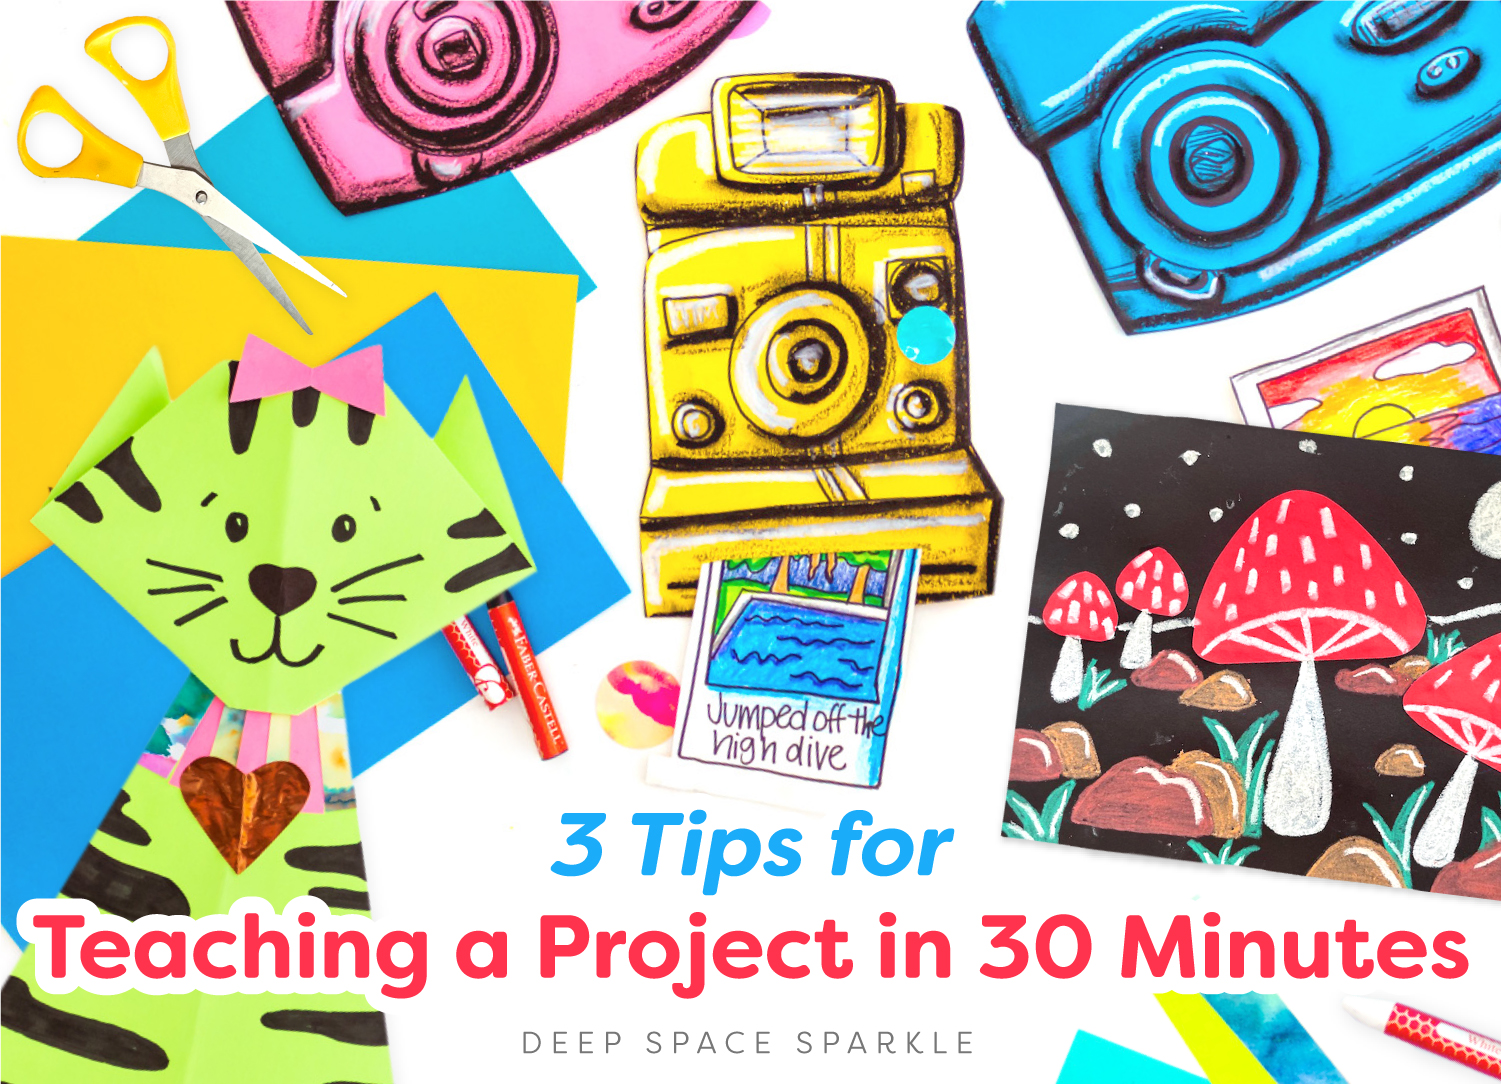 Feature 3 Tips for Teaching a Project in 30 Minutes